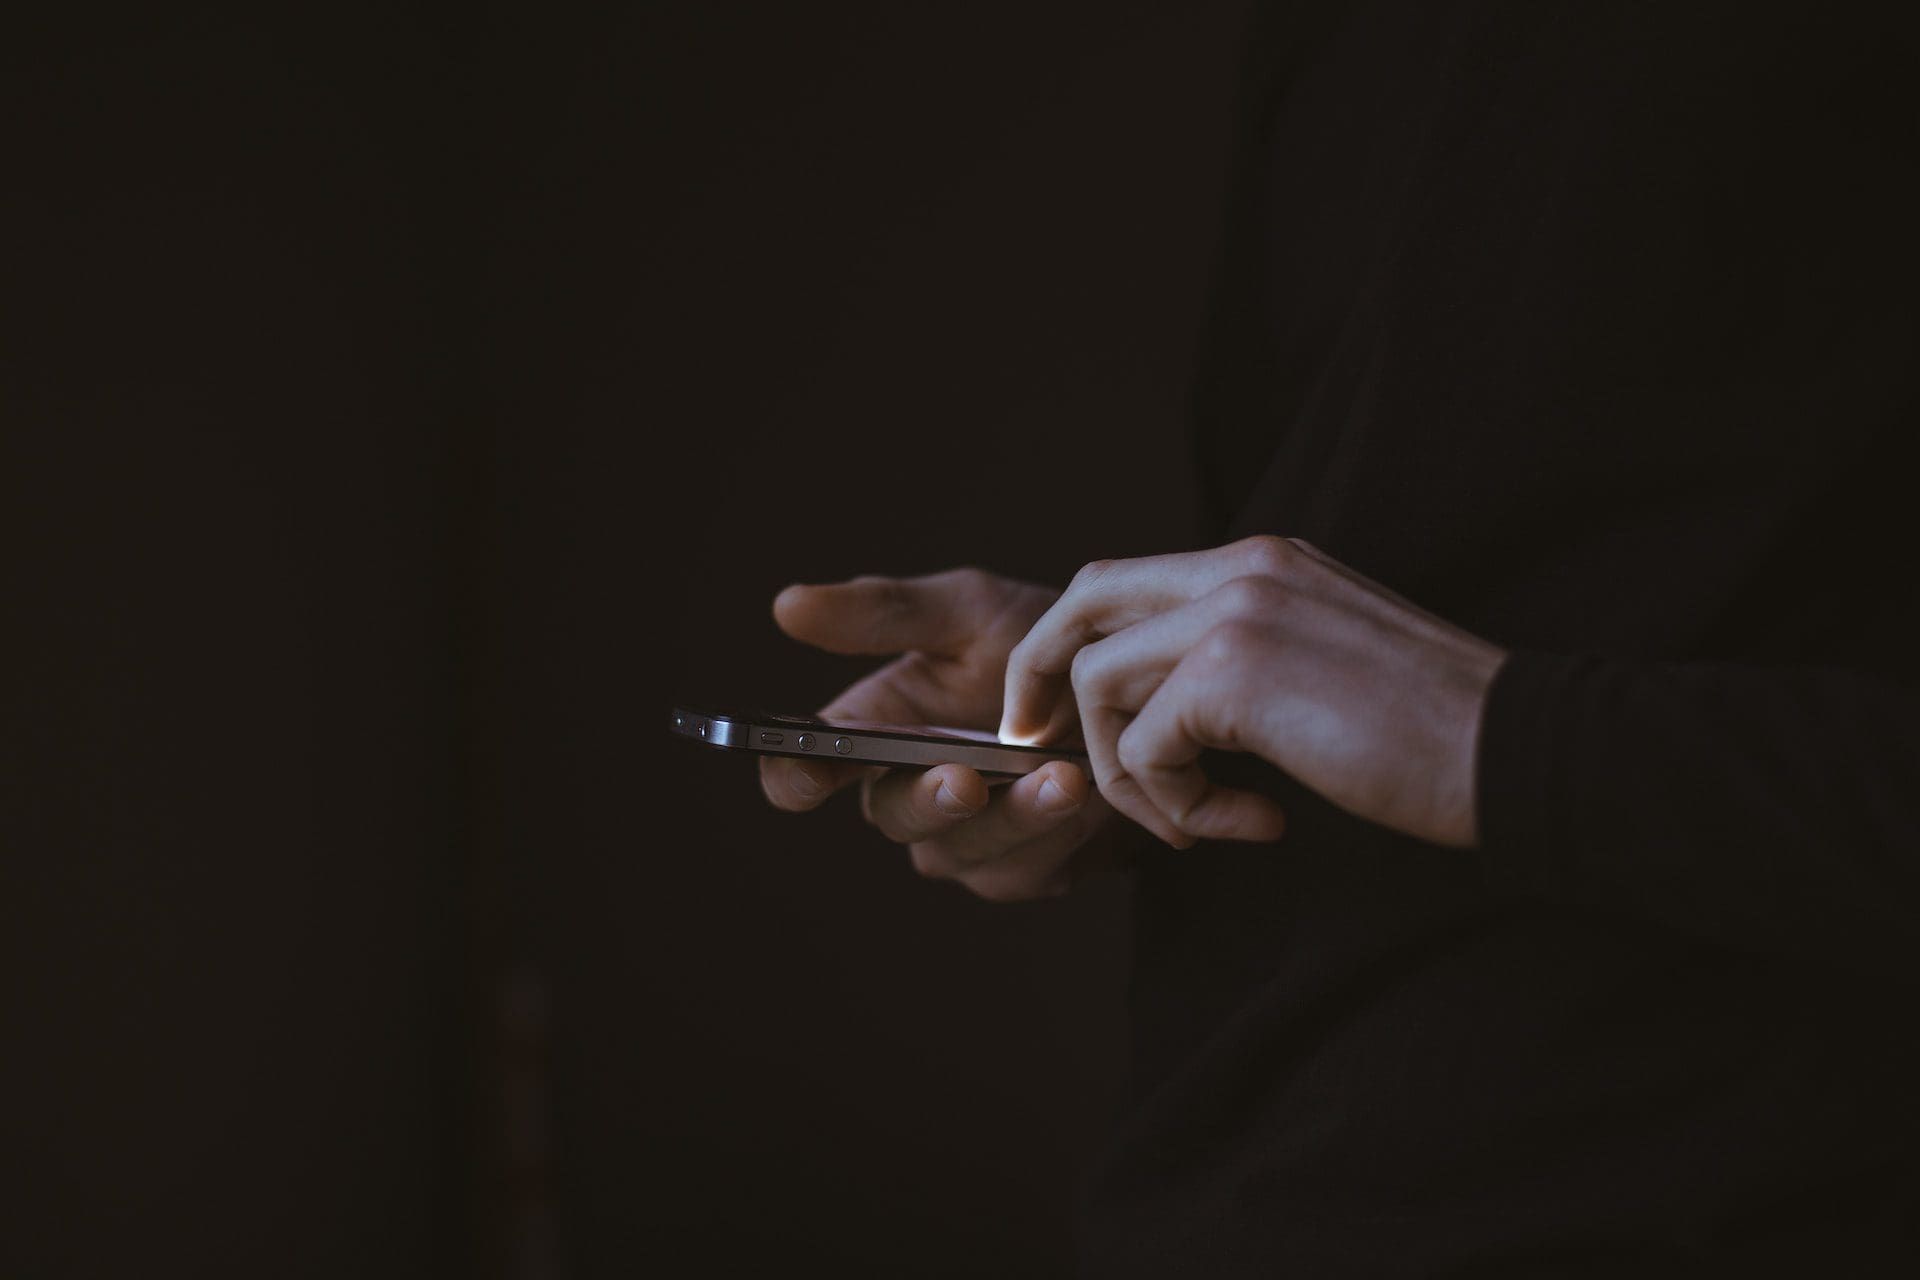 a person holding a smartphone